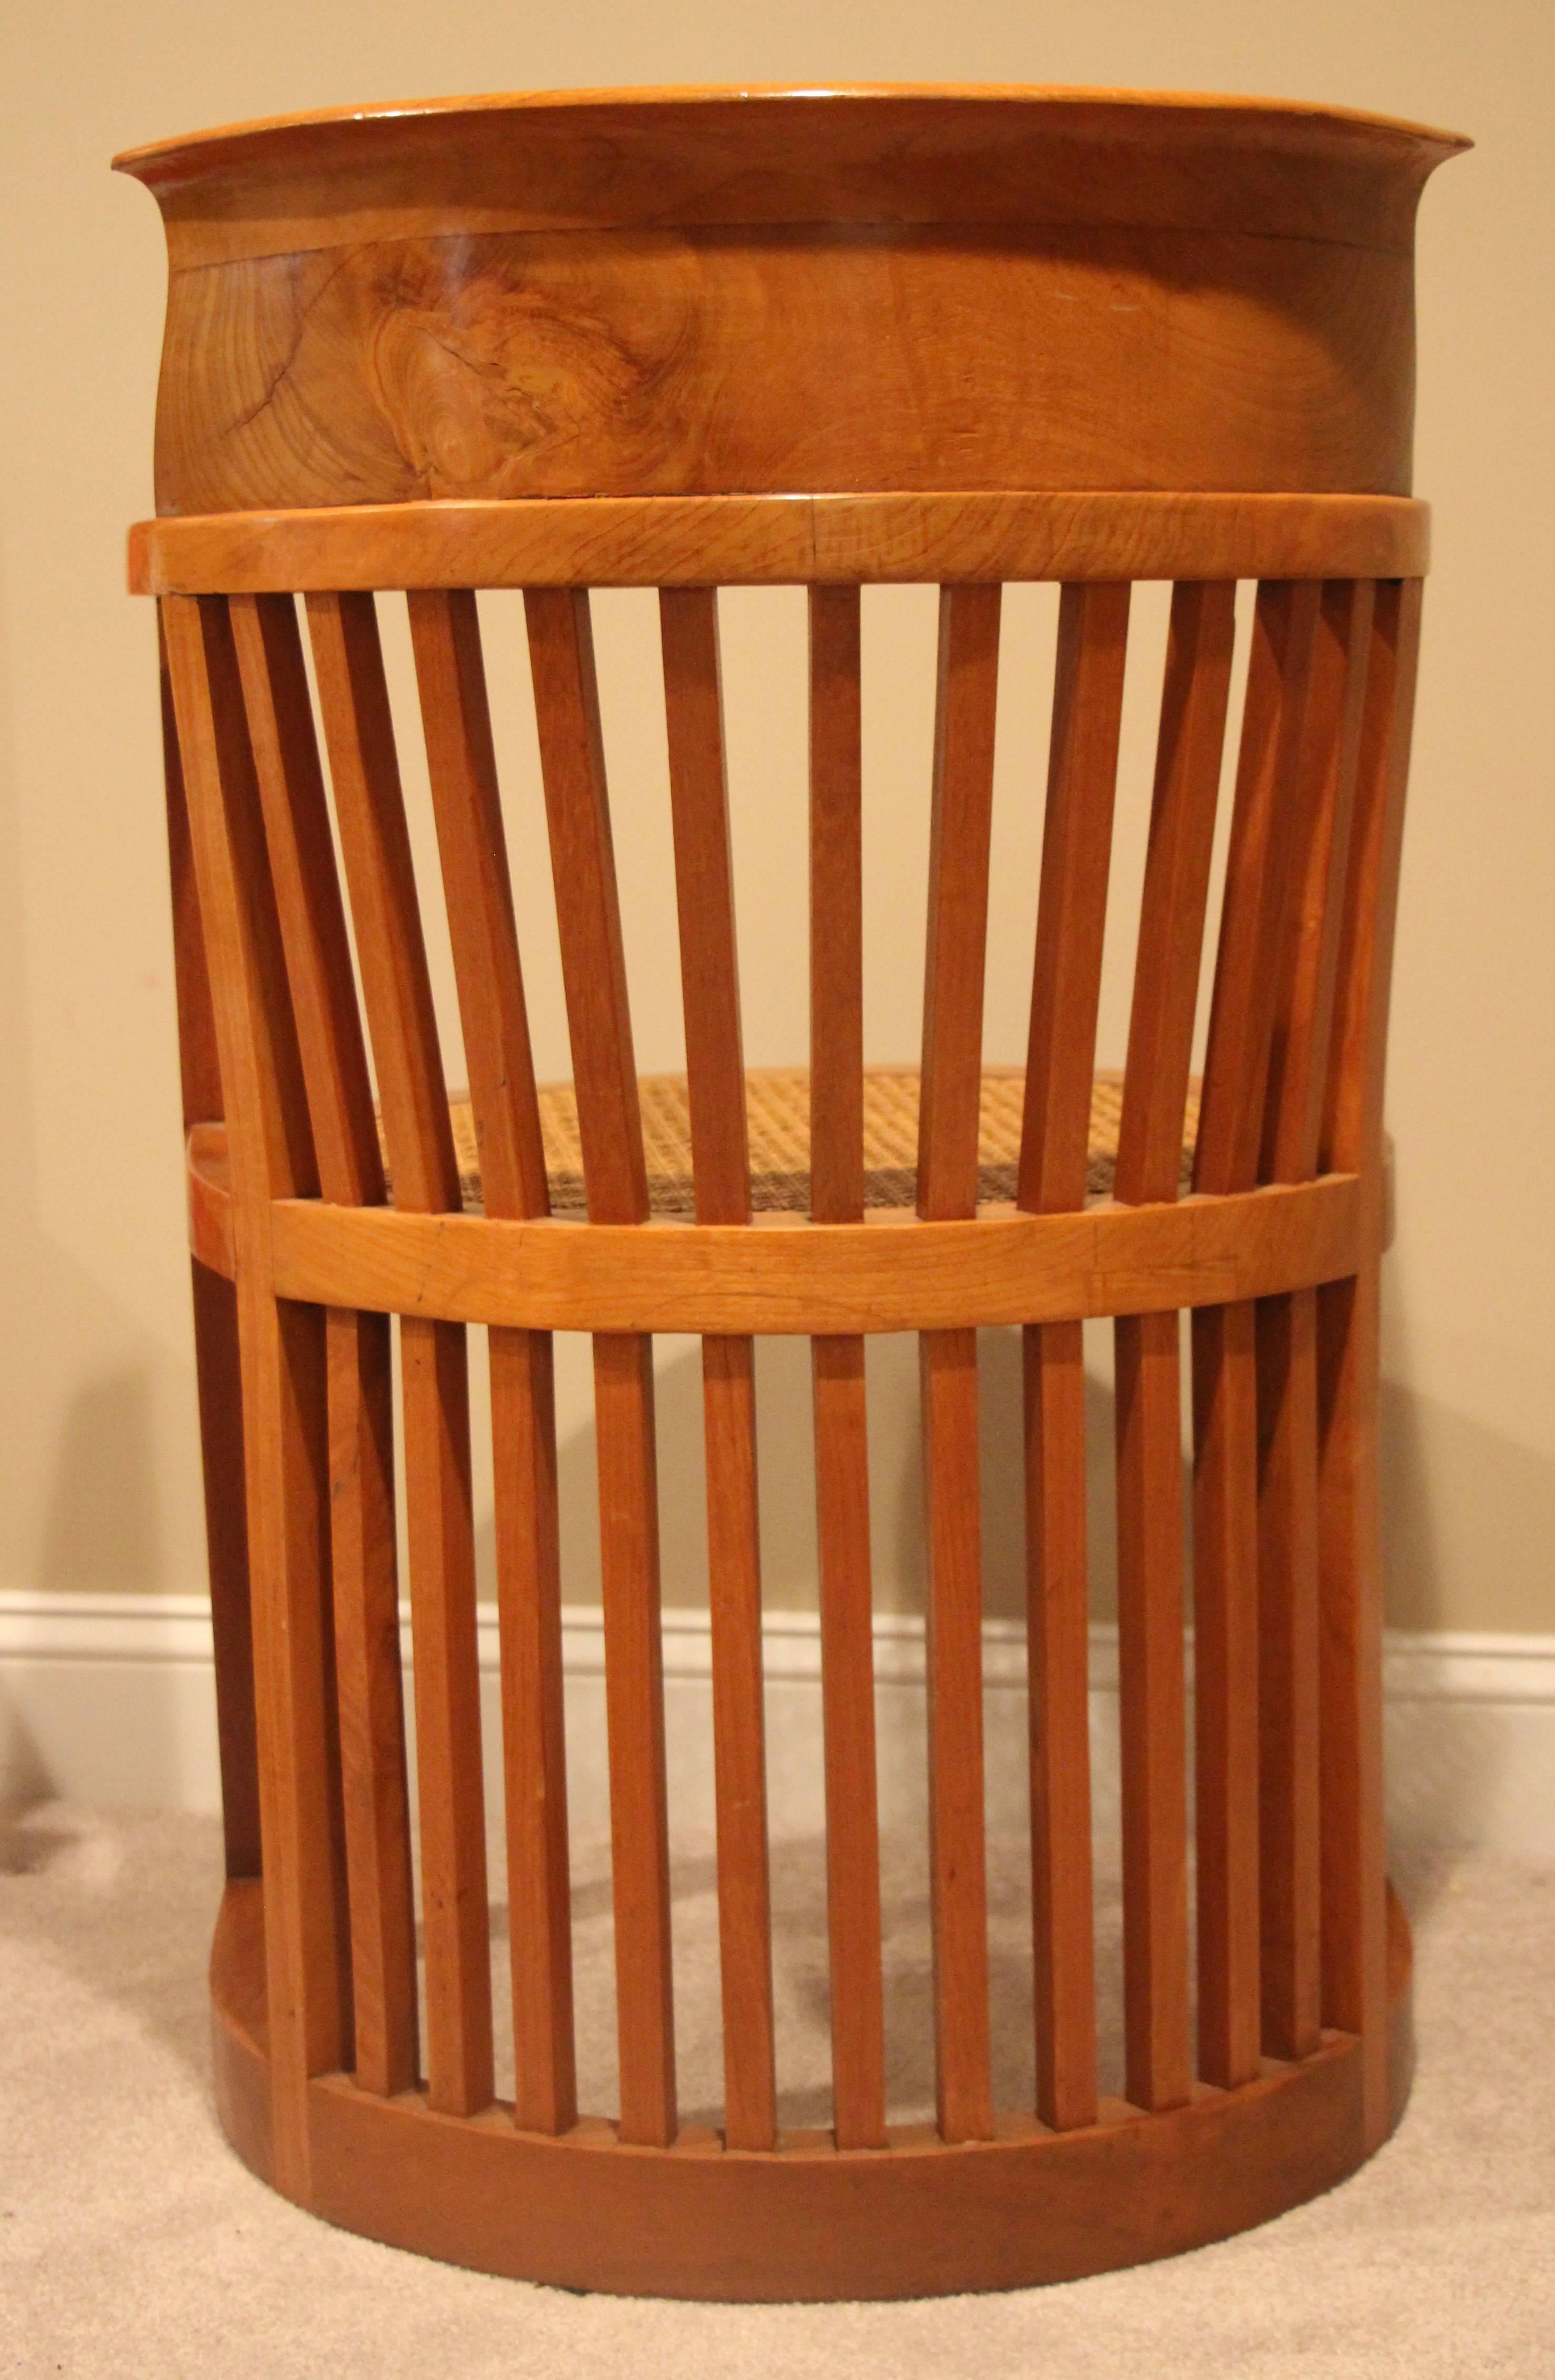 Pair of Frank Lloyd Wright style armchairs. Barrel back with square slats details, open arms. Elmwood, not marked. In good original condition, slight depression on one of the cane seats. Minor wood cracks in the back.